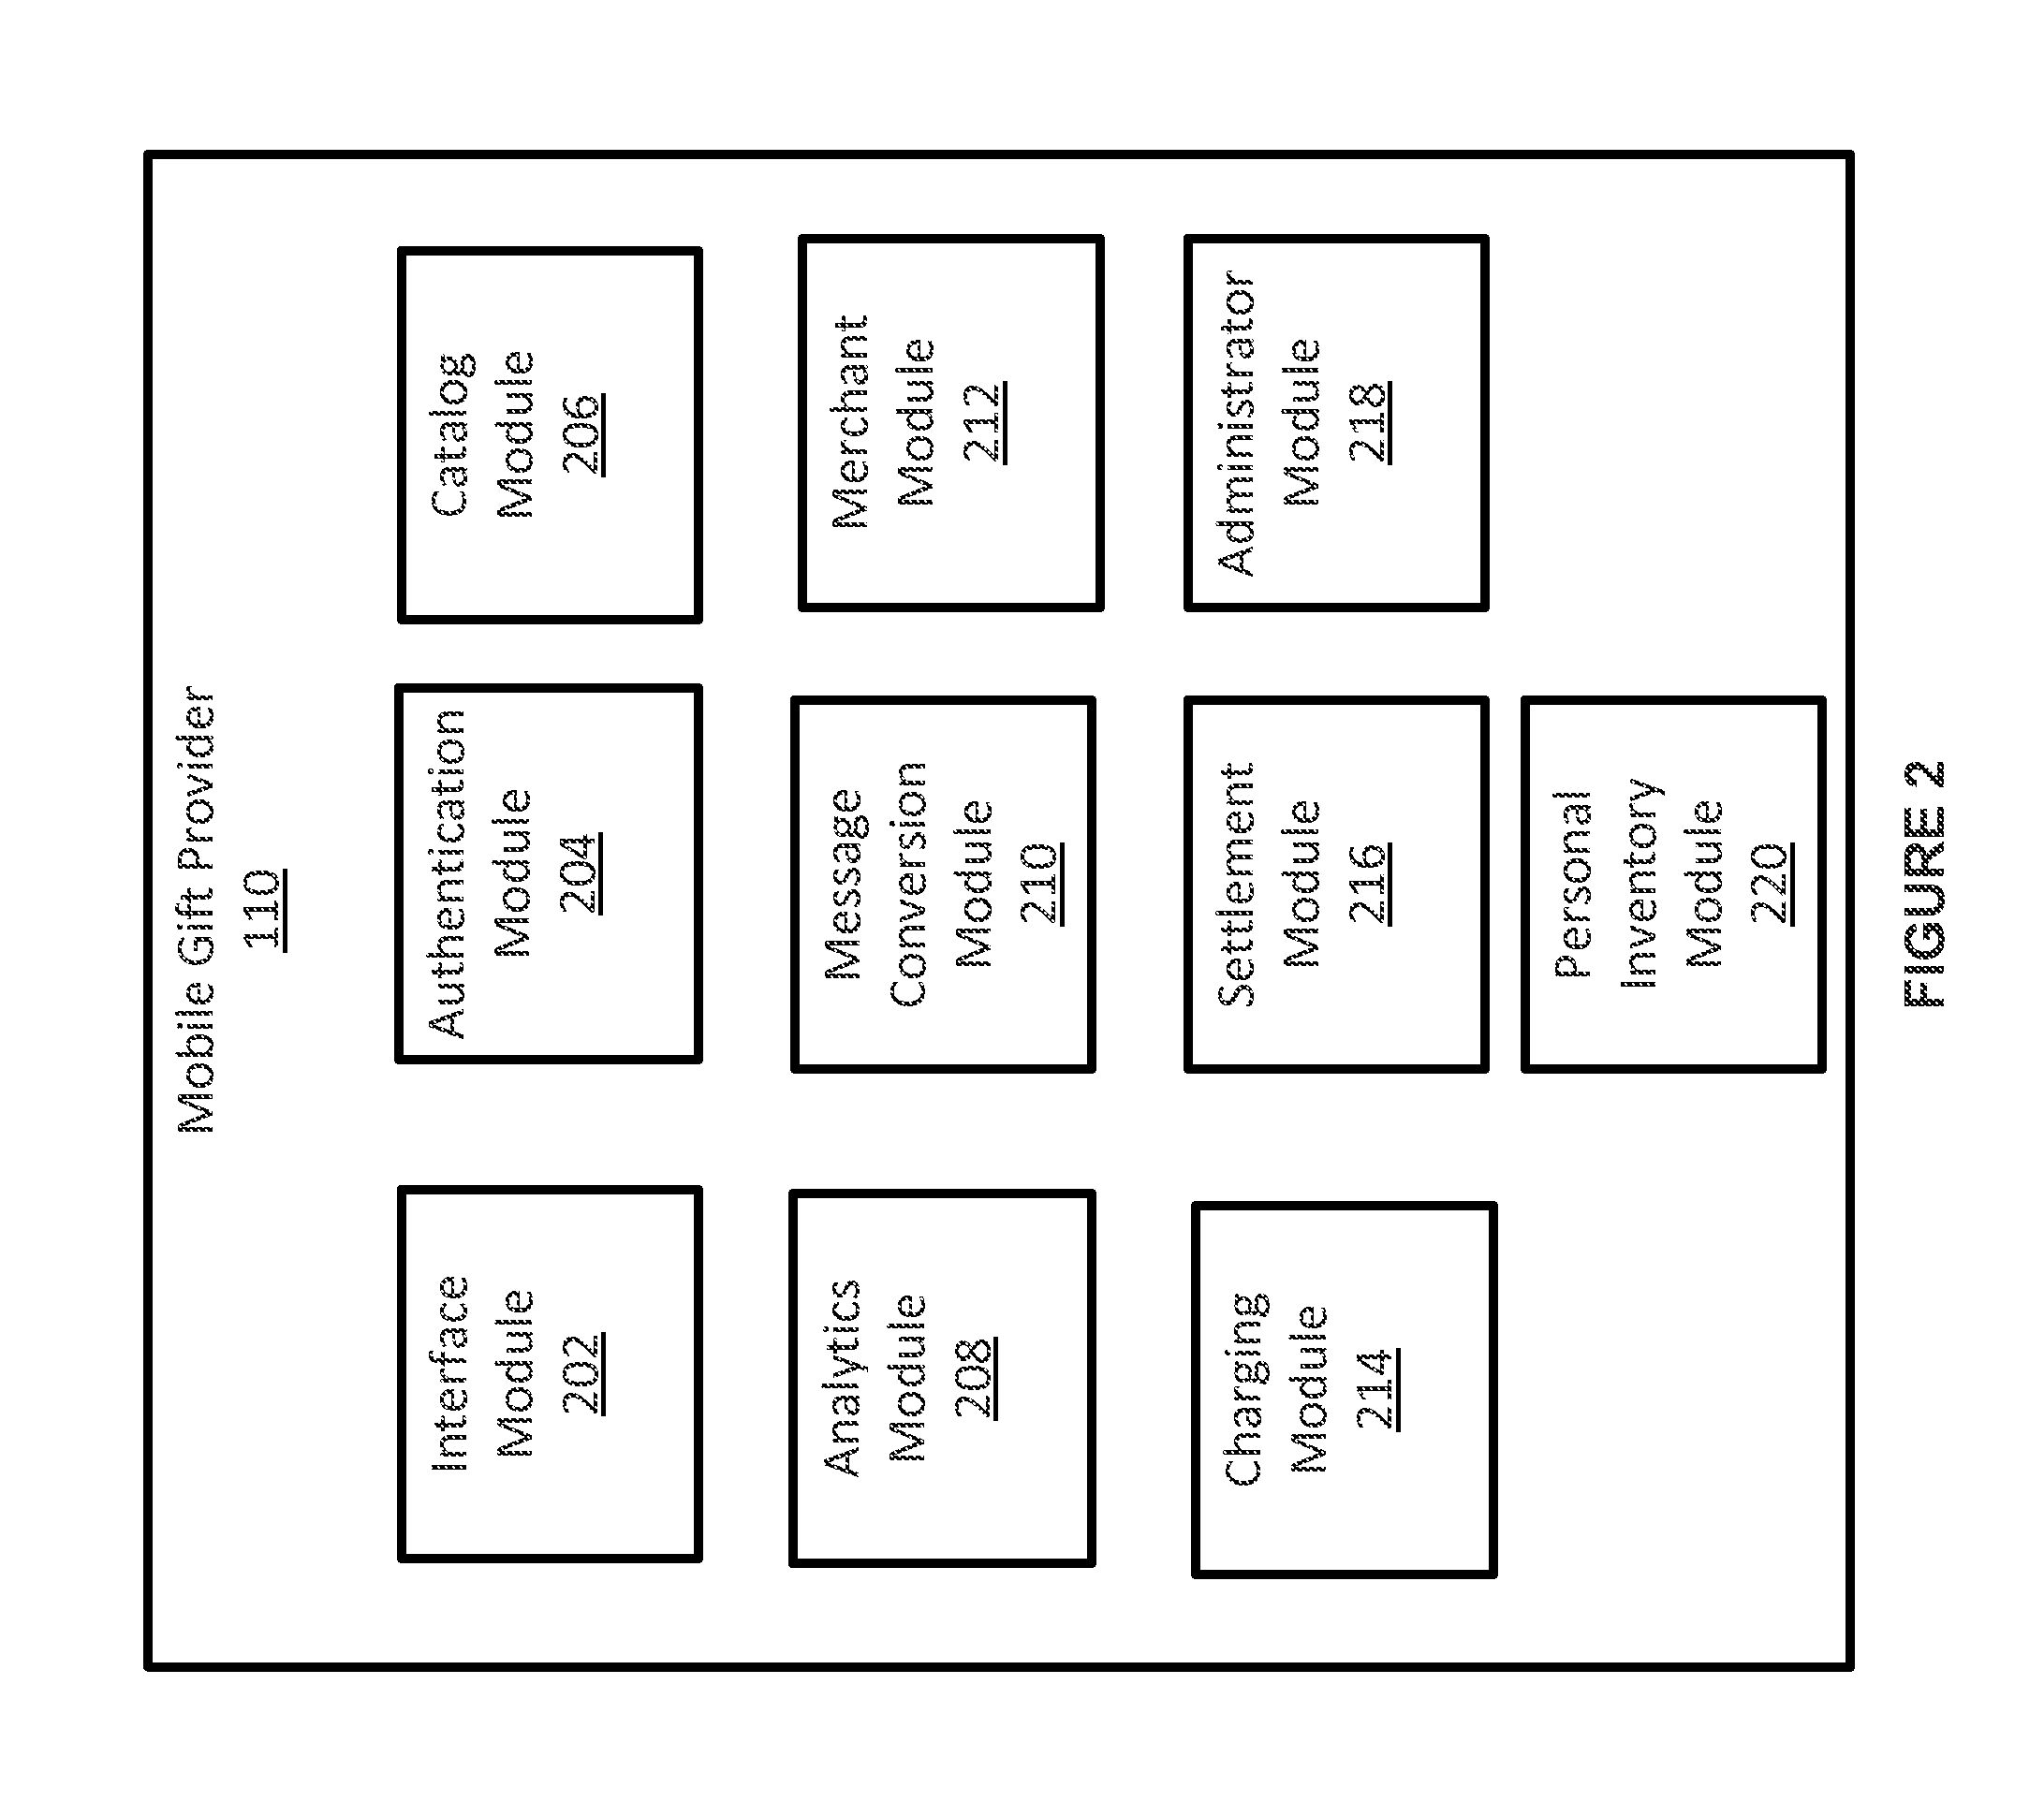 Systems and Methods for Providing Gifts Via a Mobile Messaging Platform